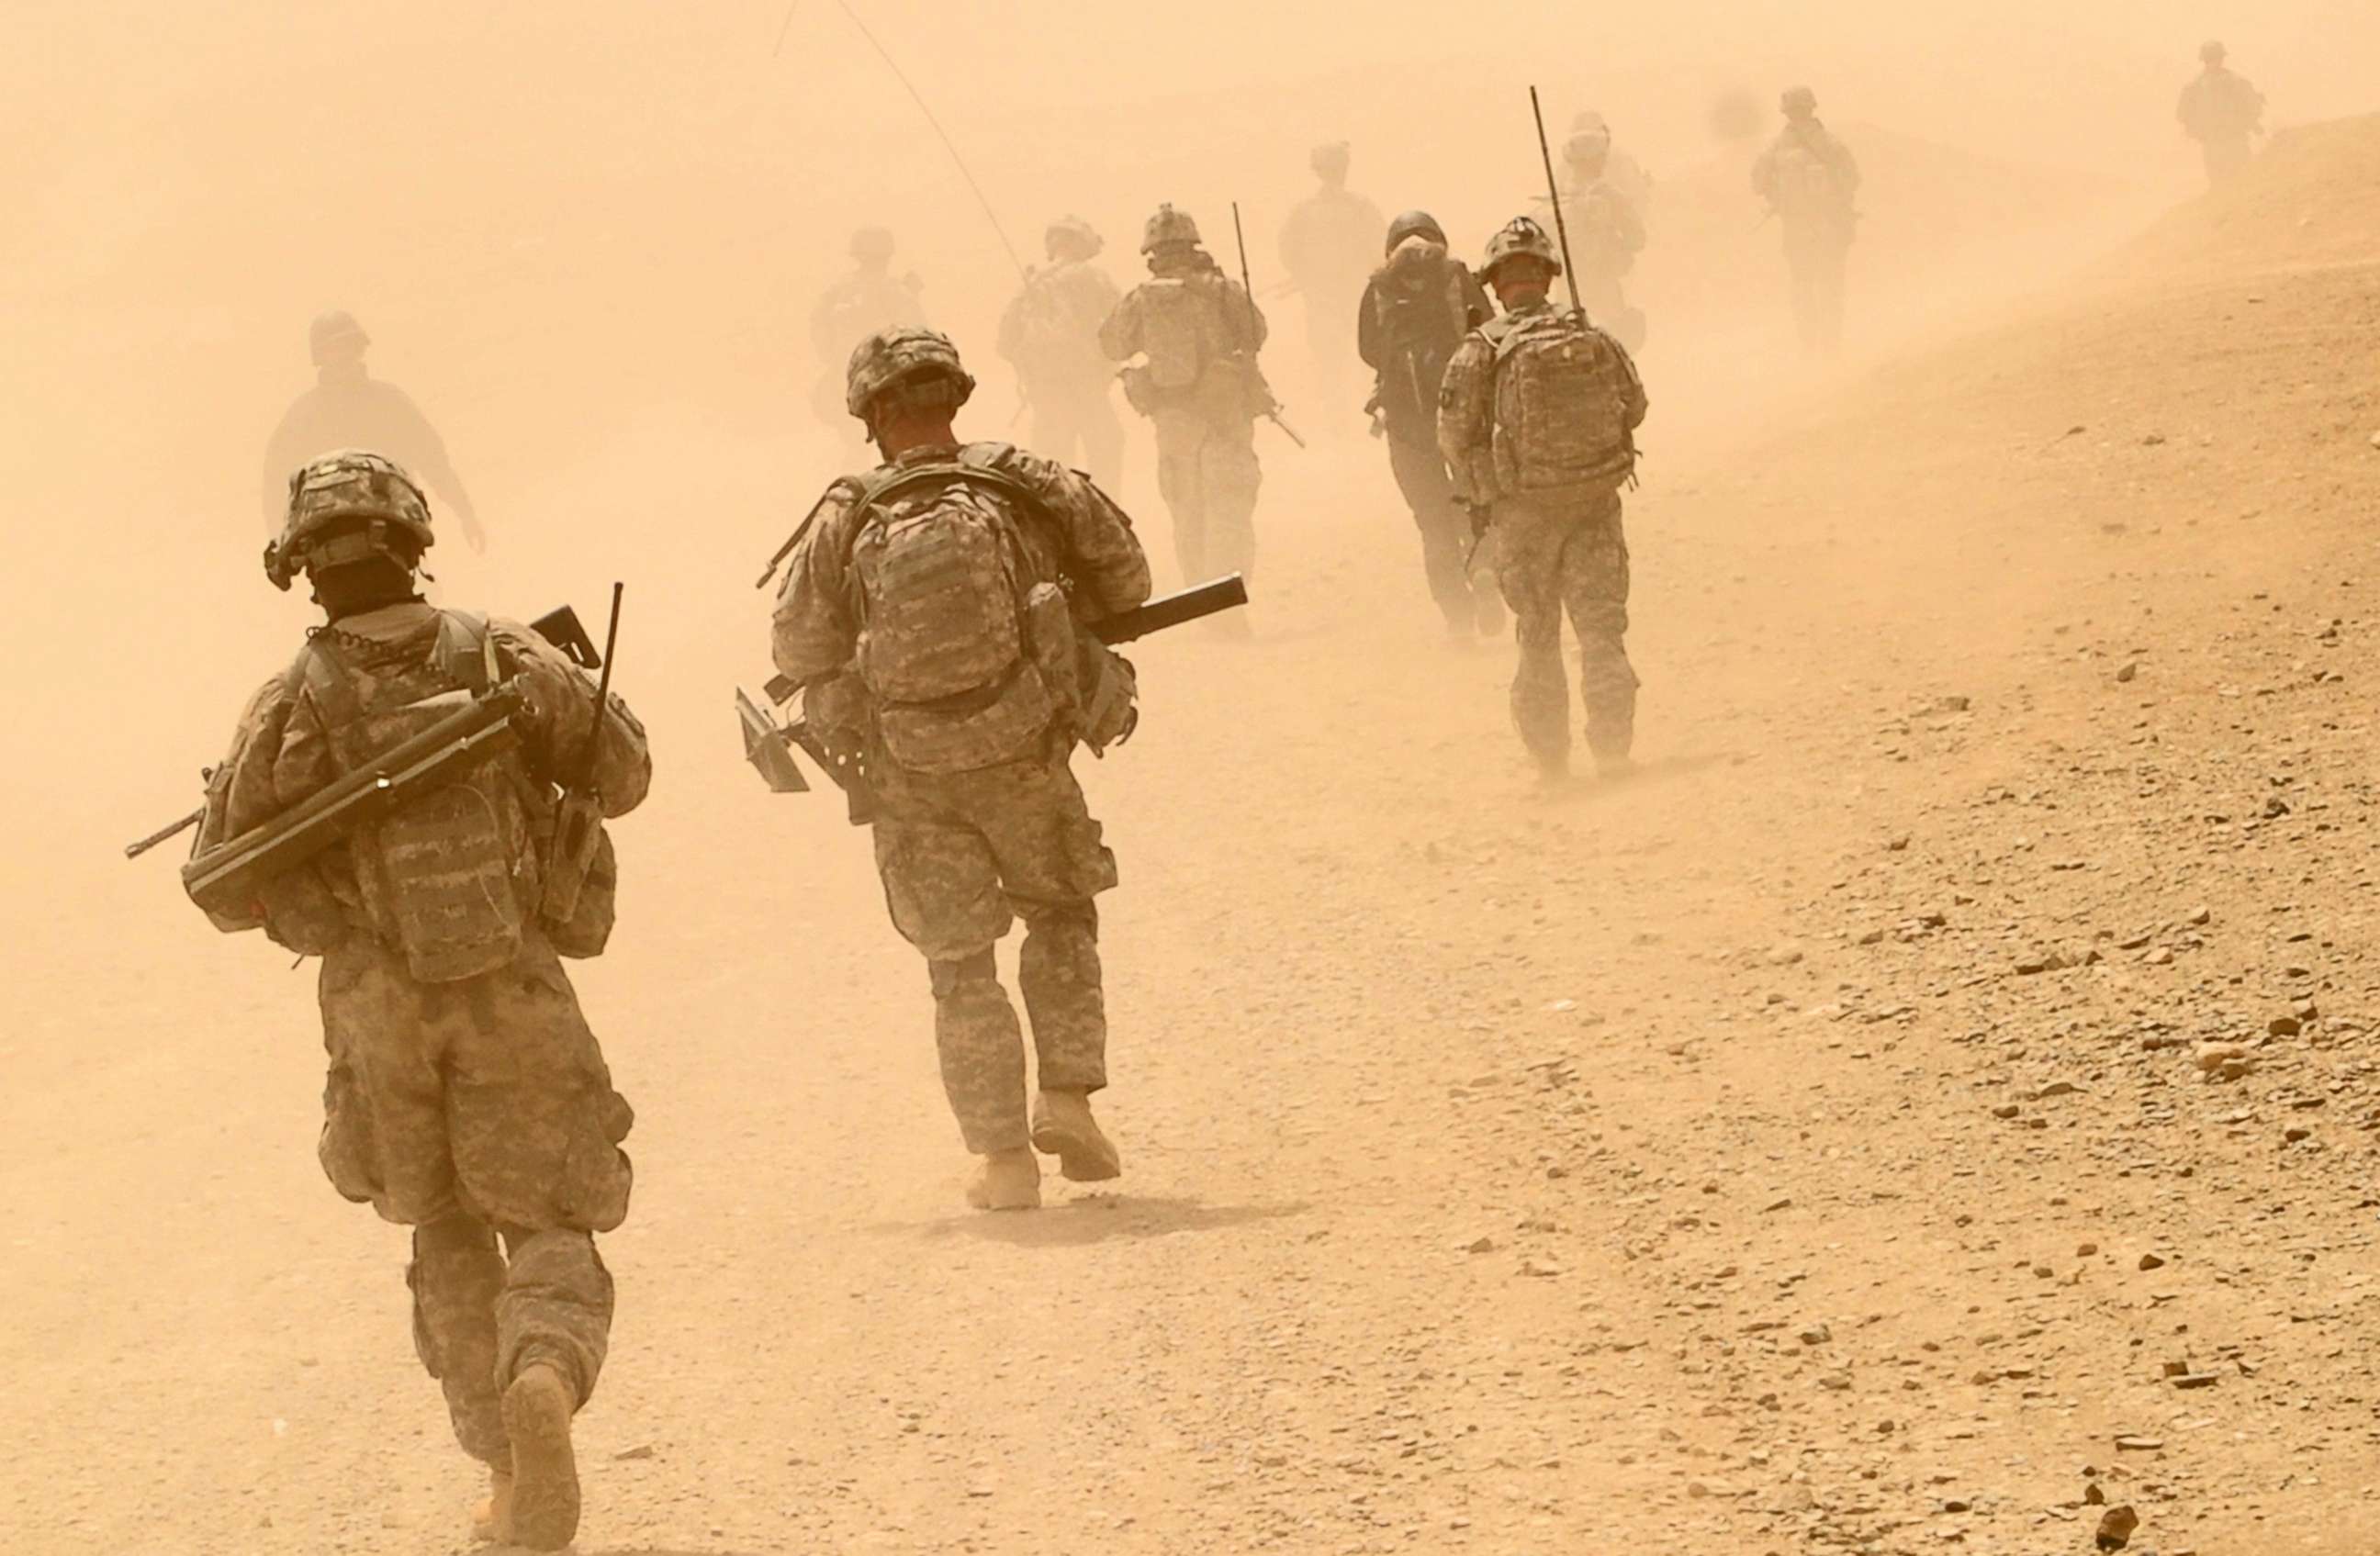 PHOTO: In this April 3, 2010, file photo, U.S. soldiers walk during a patrol in Yosef Khel district of Paktika province in Afghanistan.